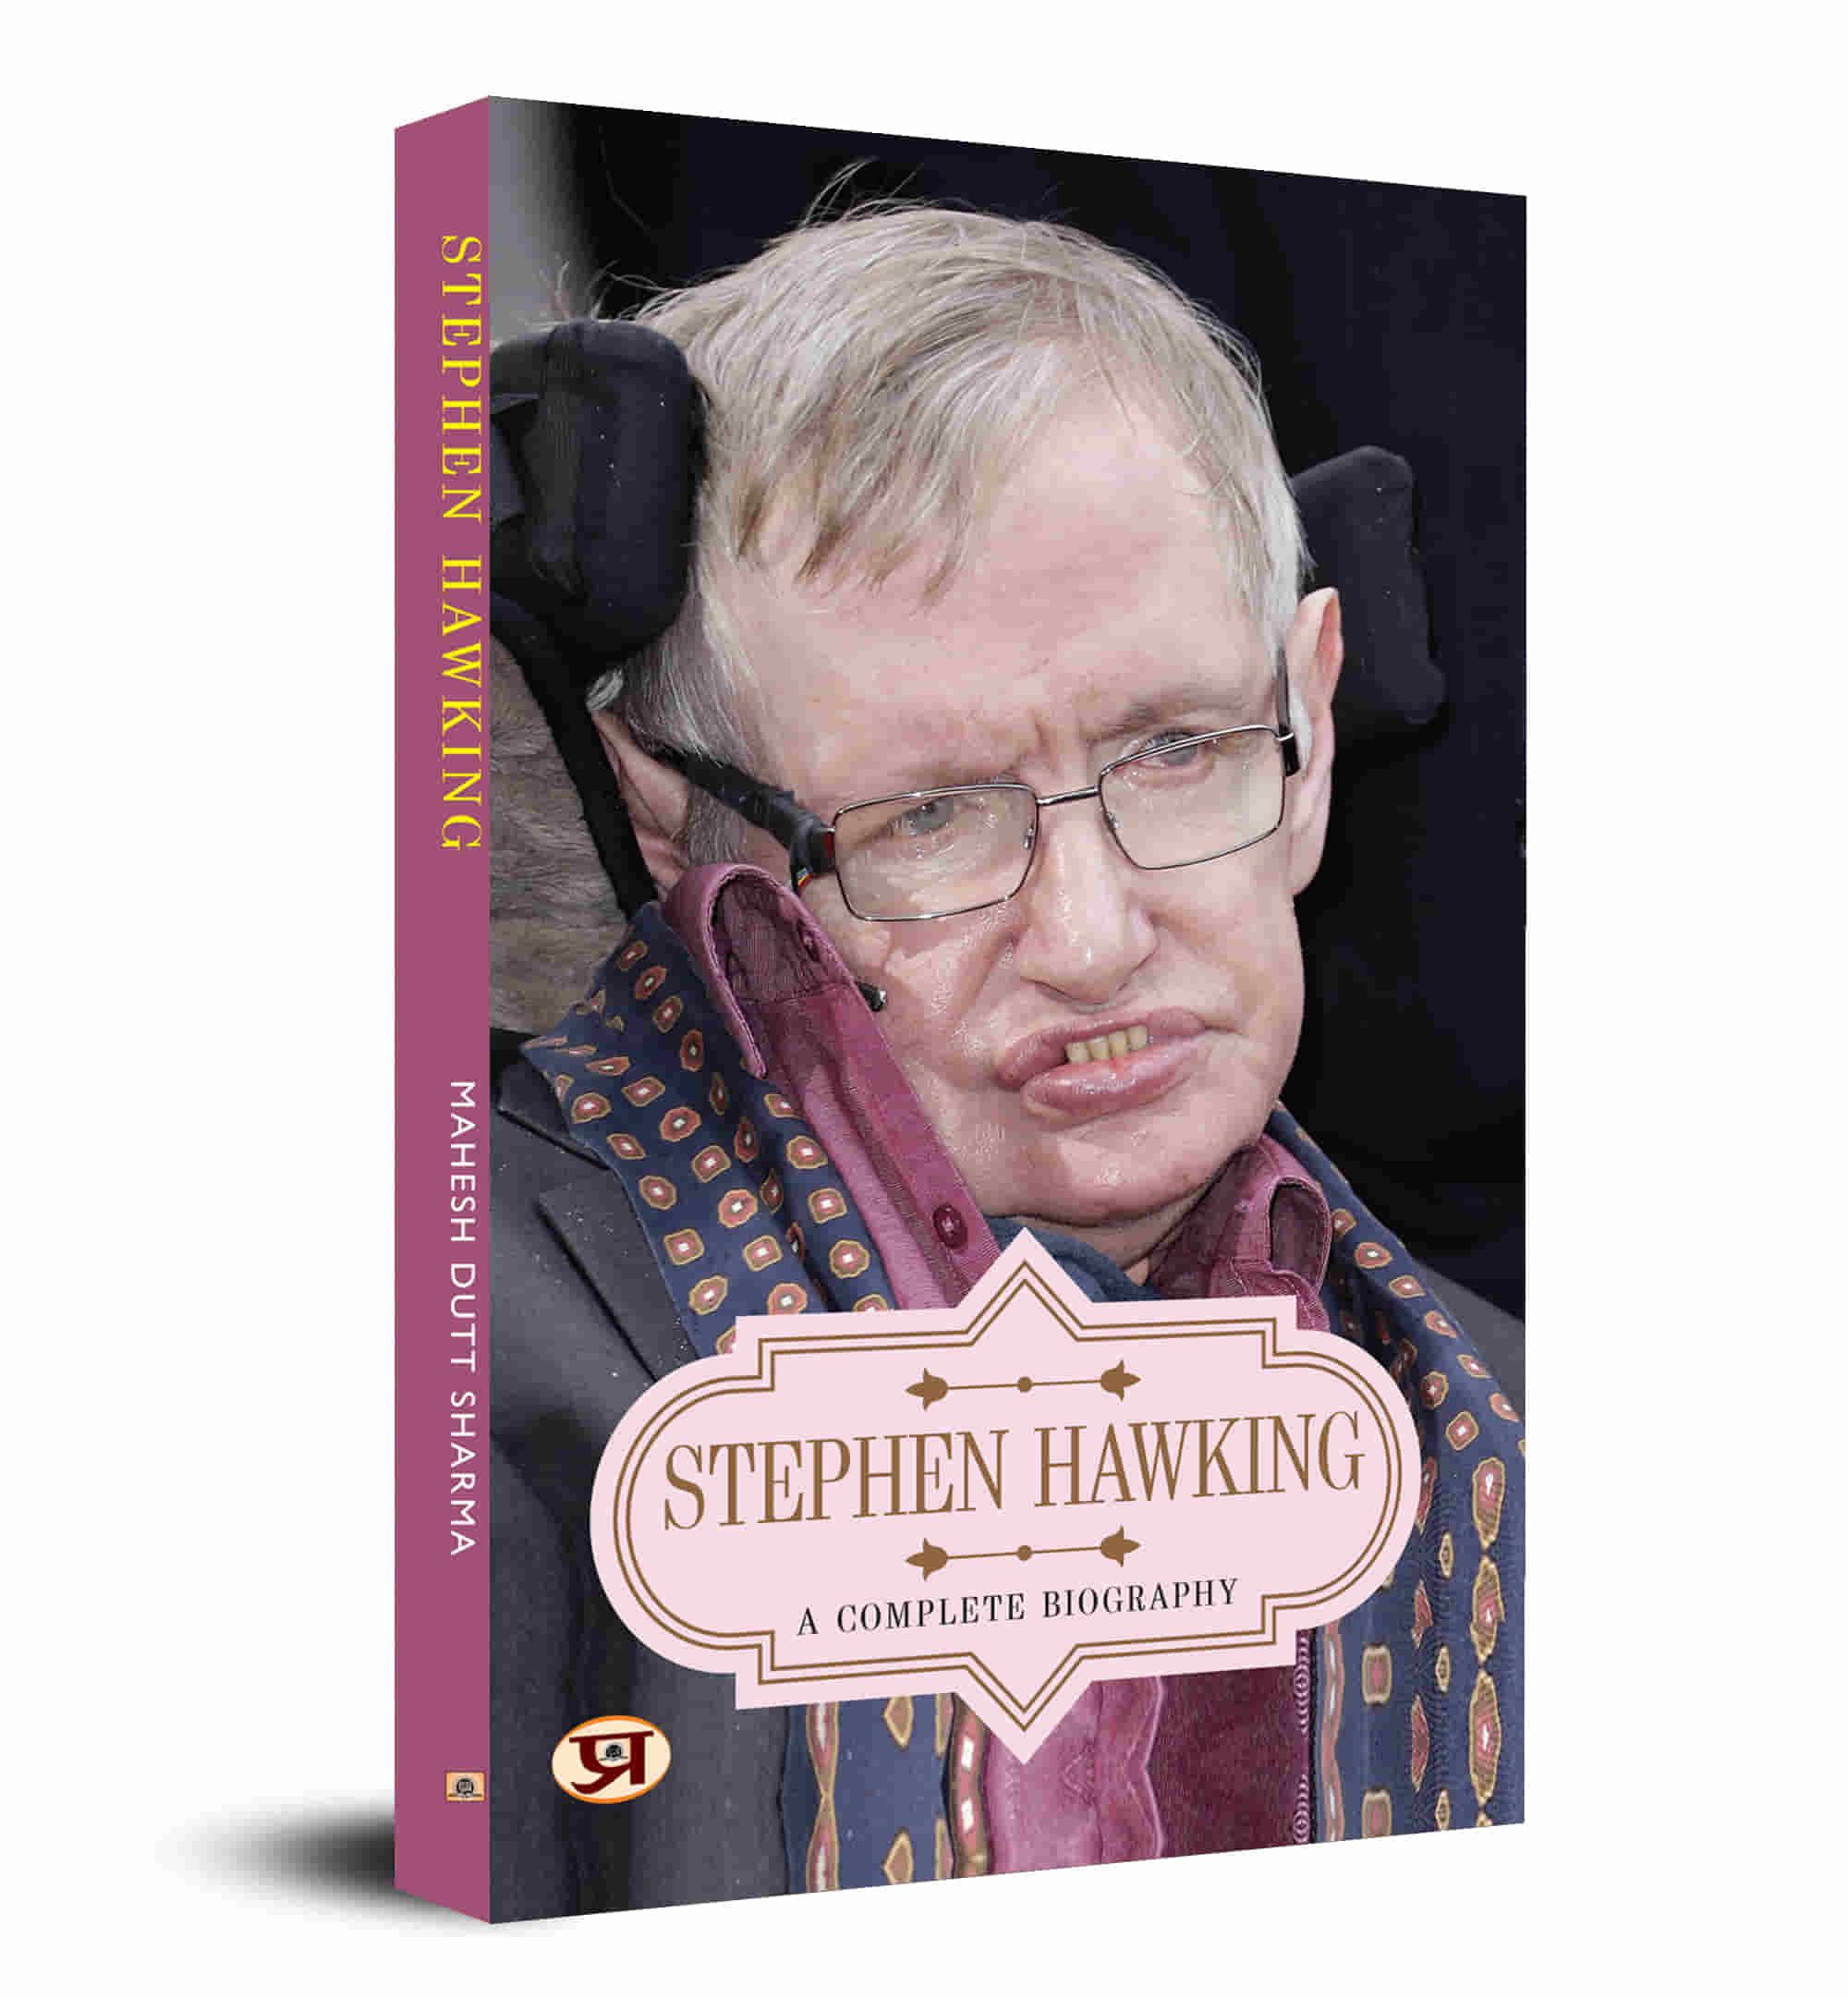 Stephen Hawking: A Complete Biography